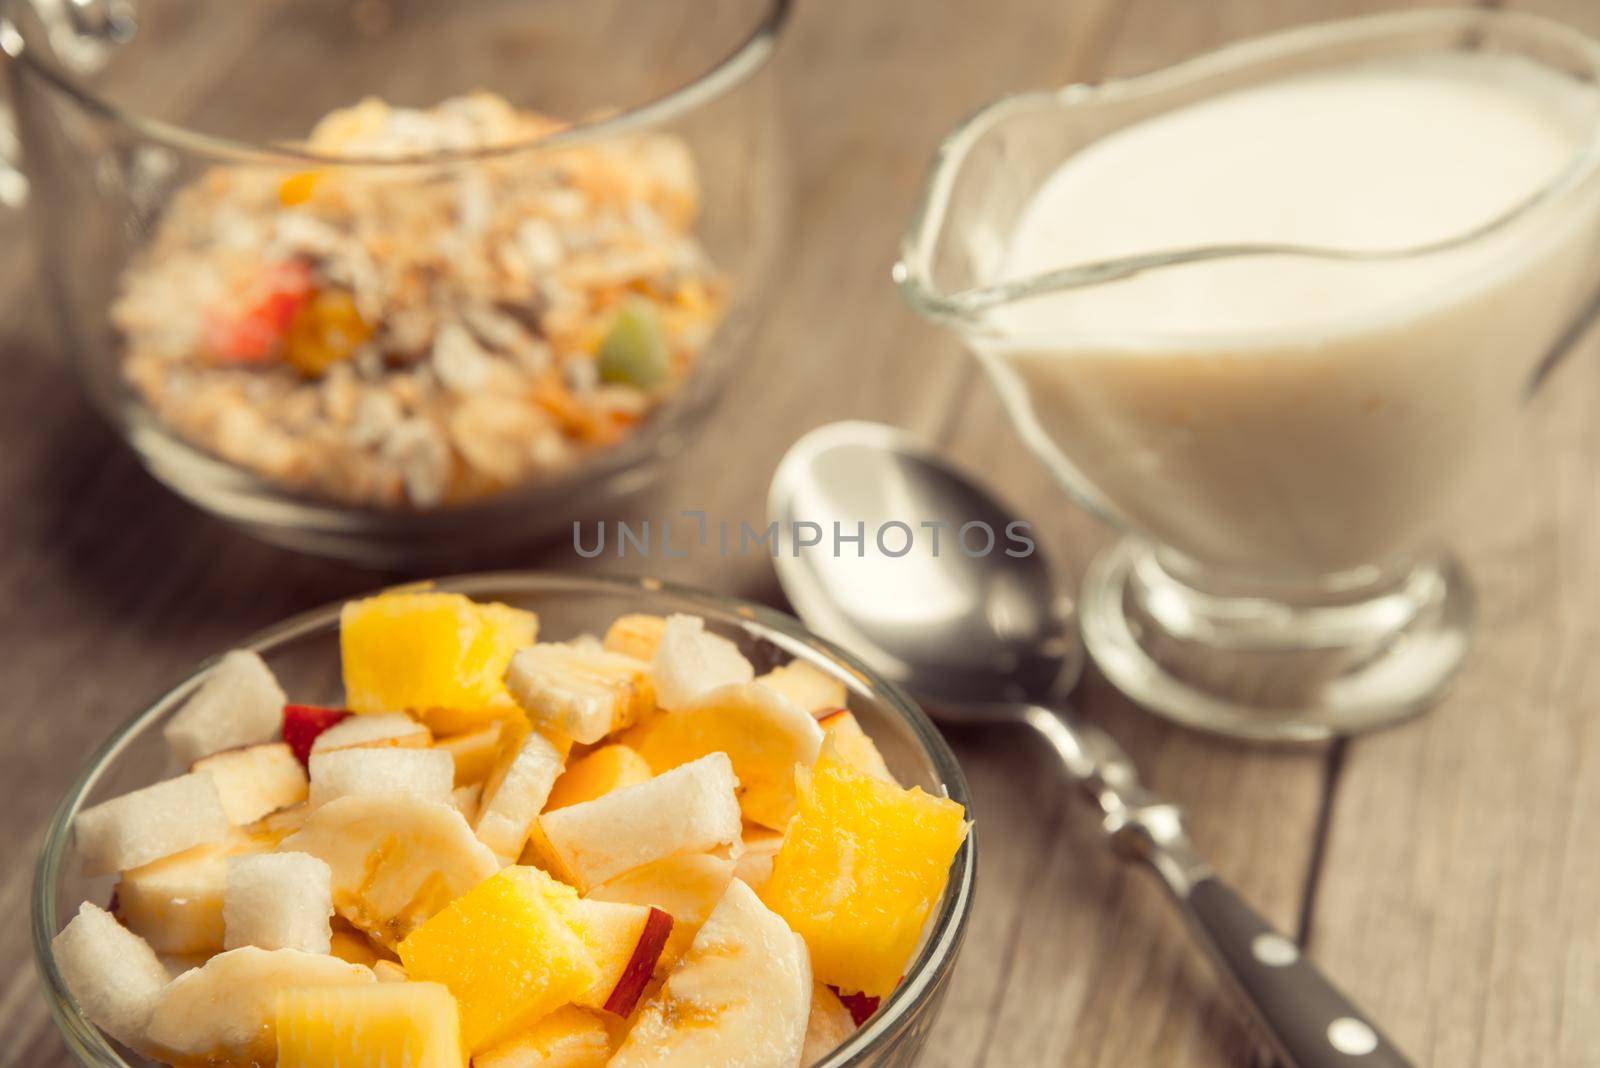 Fruit salad and muesli for breakfast on a wooden table